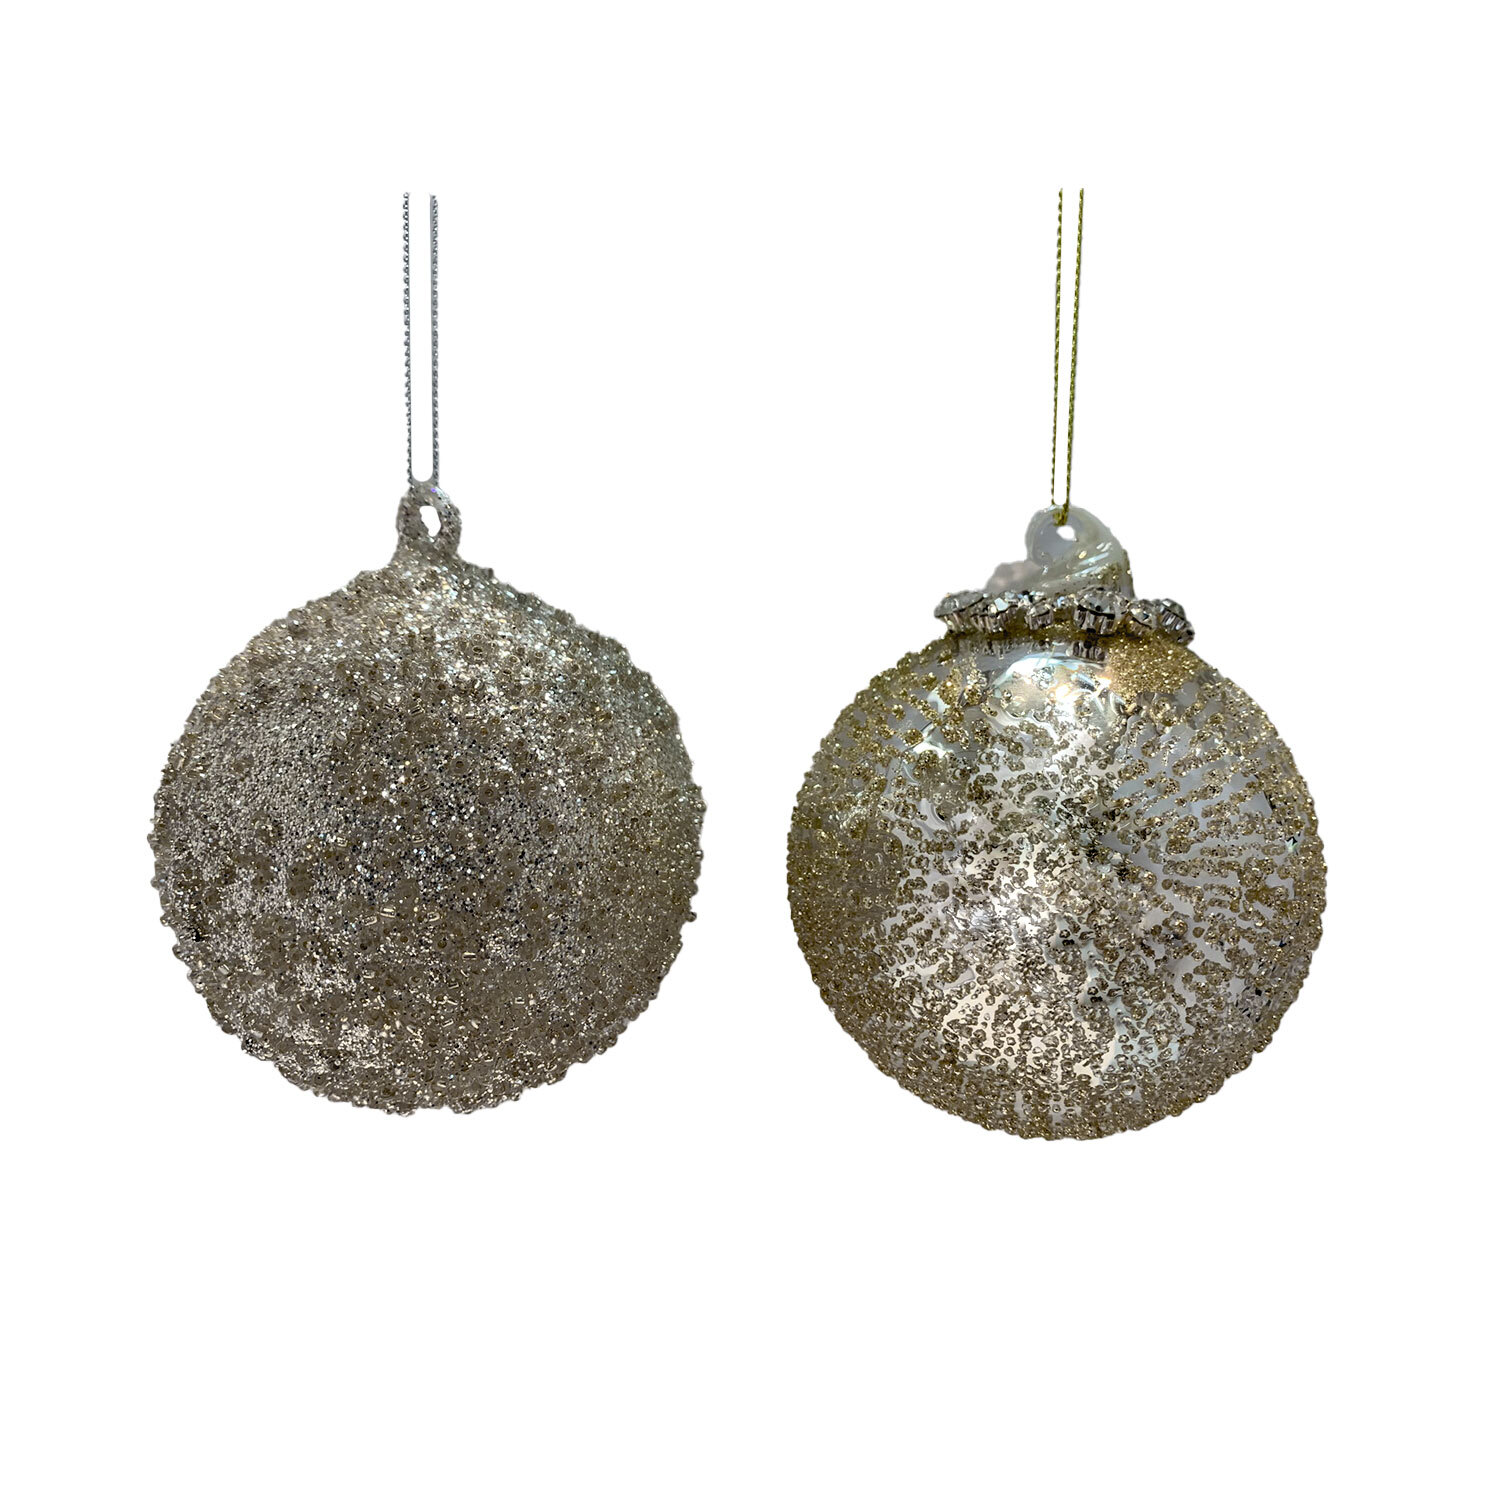 Single Chic Noir Gold Glittered Glass Bauble in Assorted styles Image